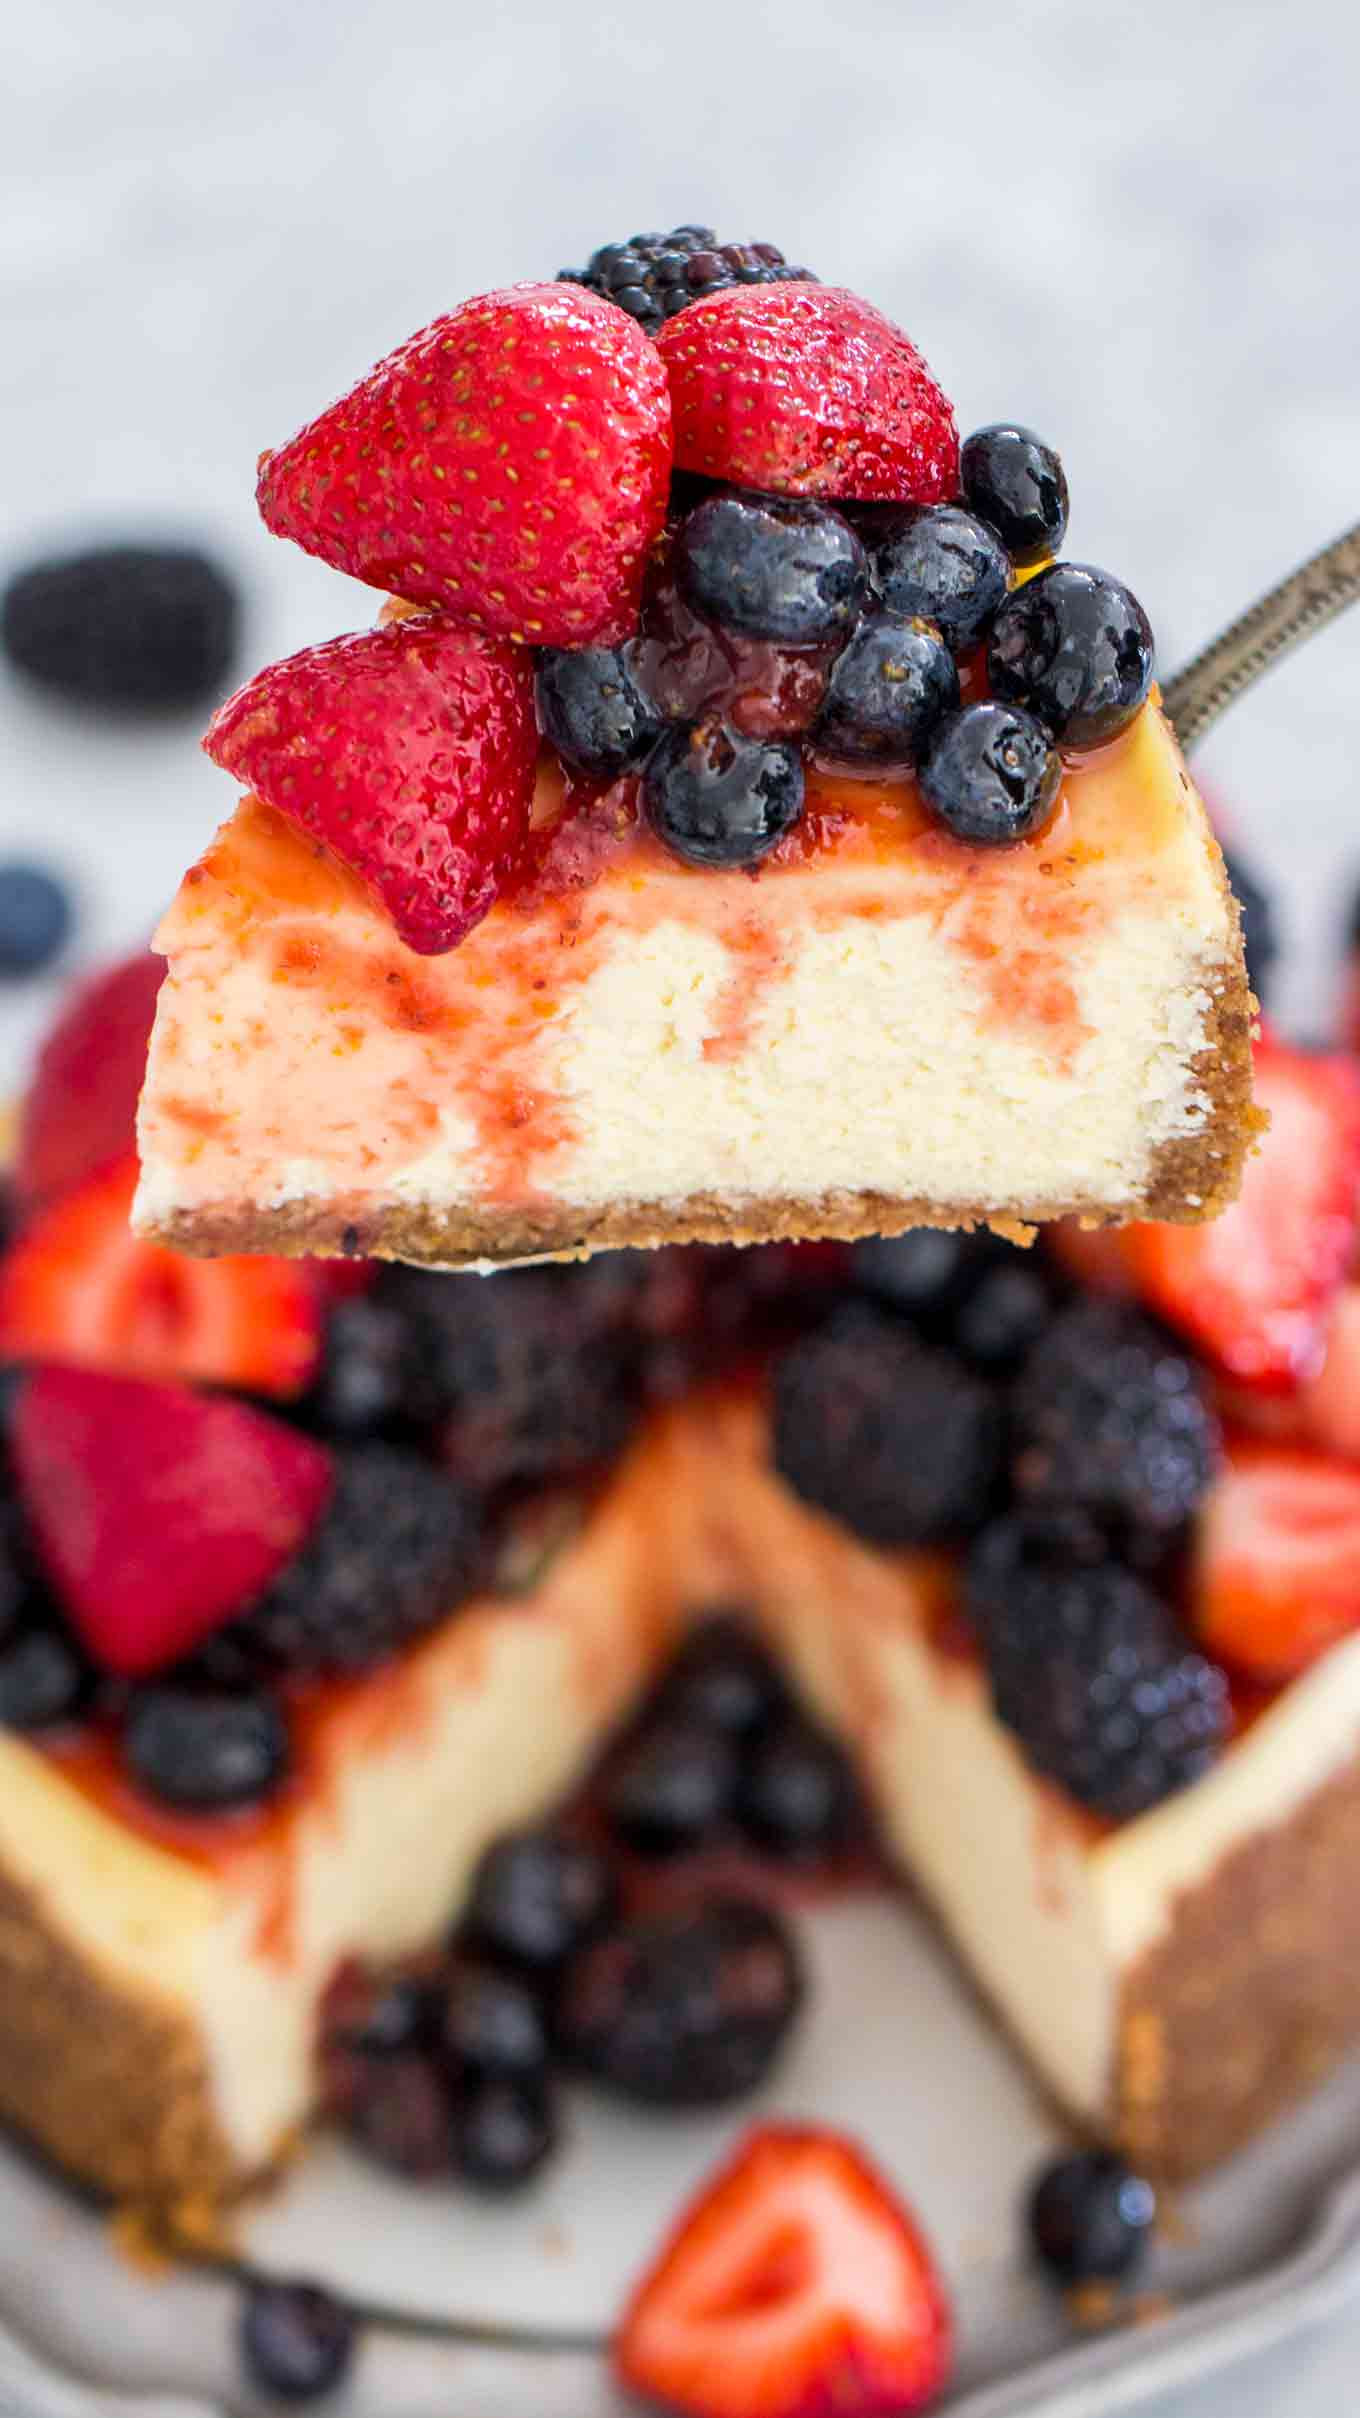 Instant Pot Springform Pan Recipes
 Best Instant Pot Cheesecake VIDEO Sweet and Savory Meals